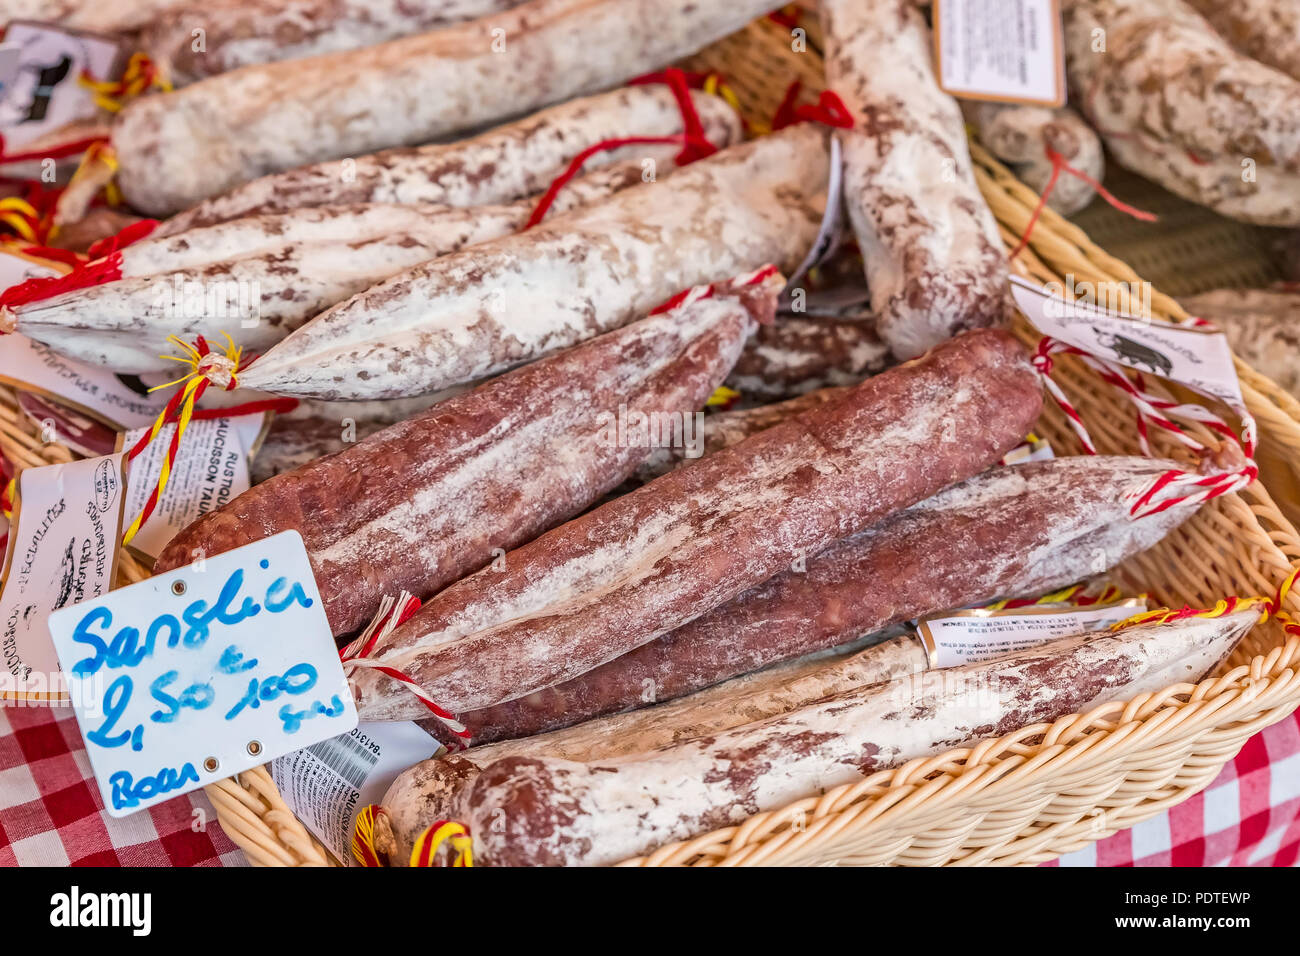 Sausage in a basket on a market stand covered with a traditional red checkered cloth in the Old Town, Vieille Ville in Nice, French Riviera, France Stock Photo